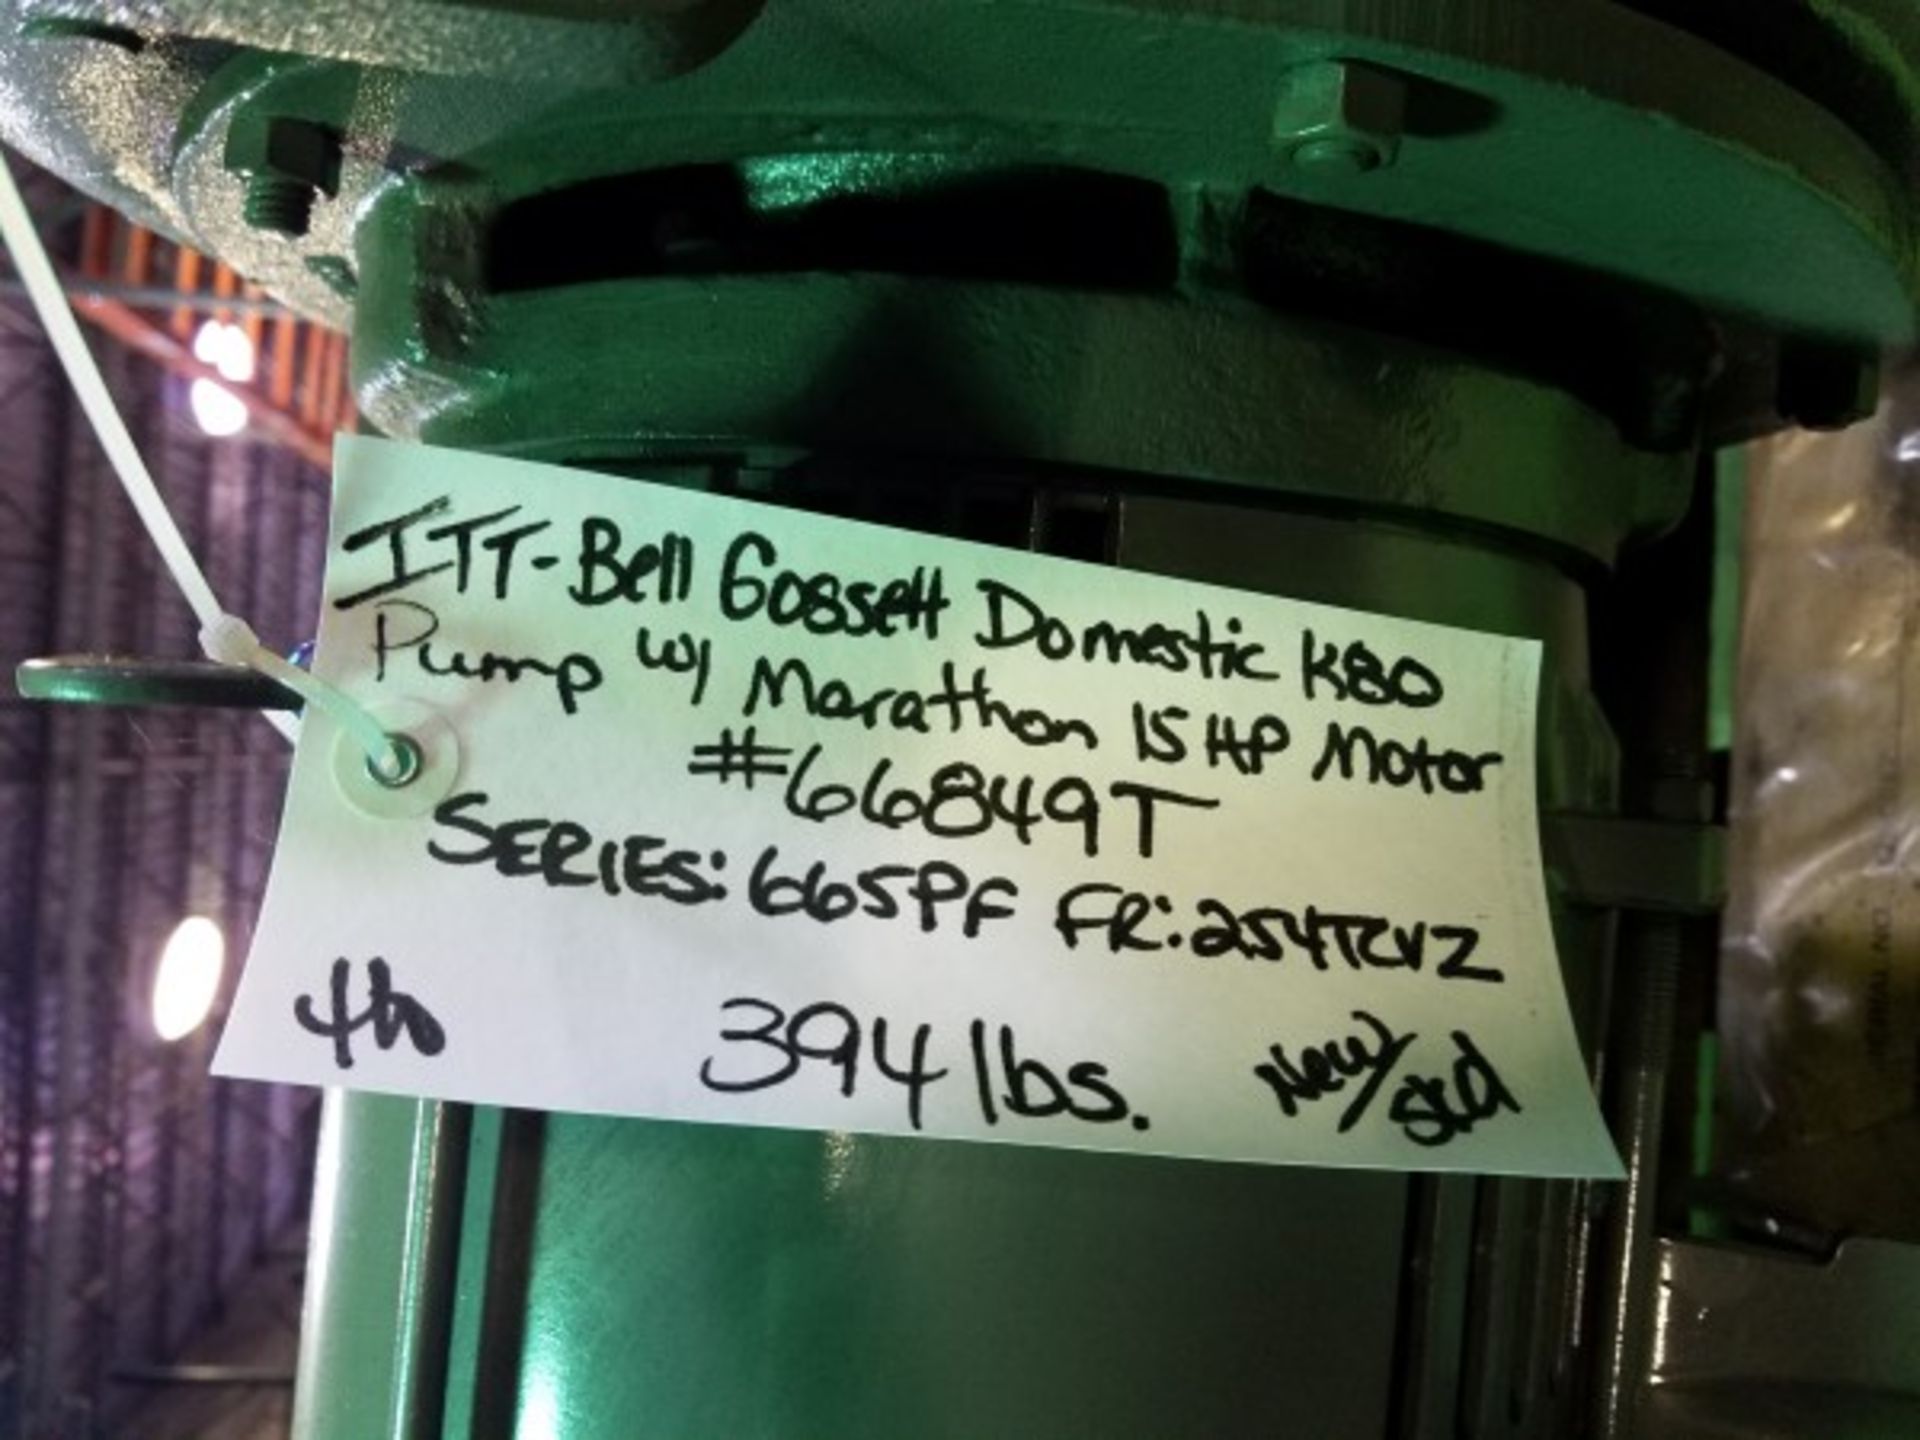 ITT/Bell Gossett Domestic K80 Pump, 15 HP | Seller to load for $10 per lot or buyers may remove hand - Image 2 of 2